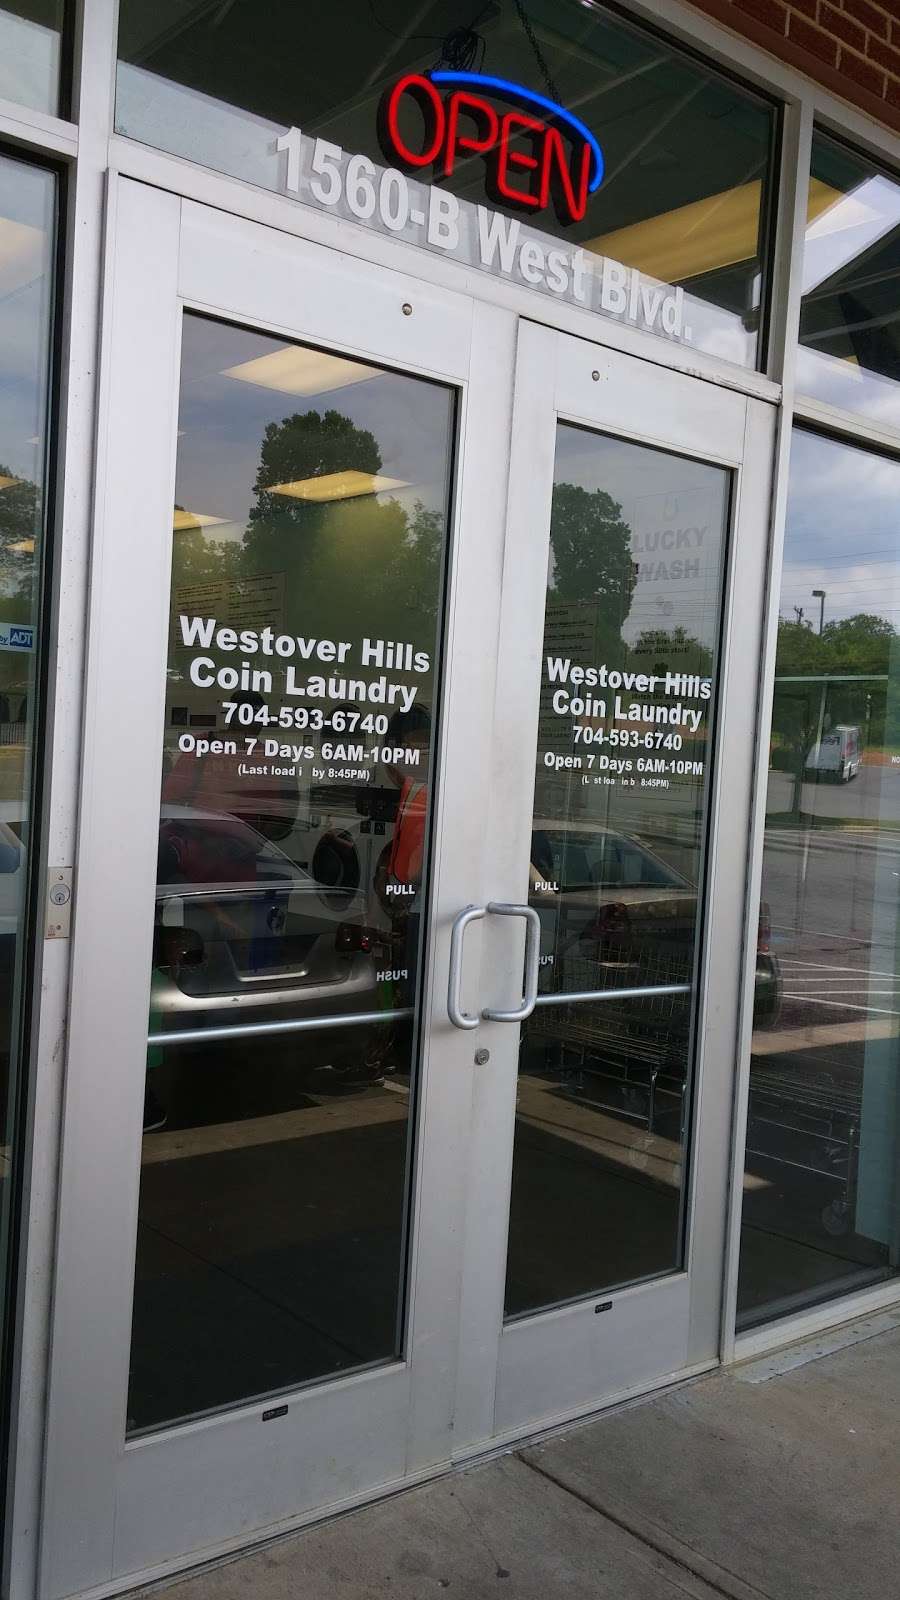 Westover Hills Coin Laundry | B, 1560 West Blvd, Charlotte, NC 28208 | Phone: (704) 593-6740